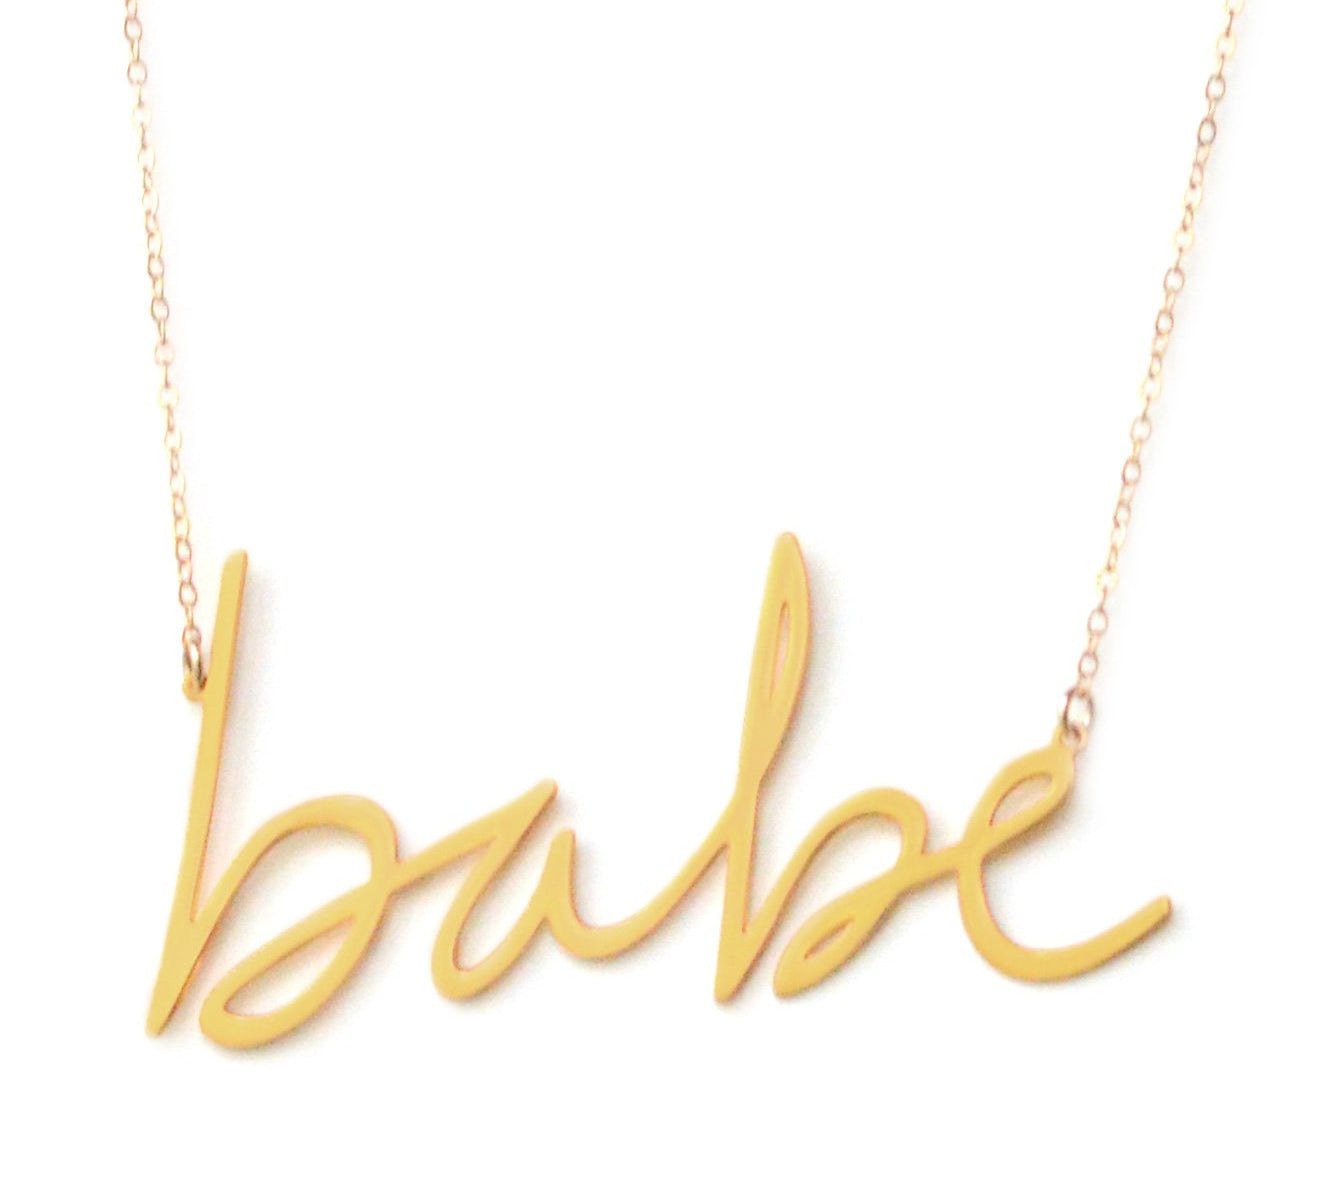 Babe Necklace - High Quality, Affordable, Hand Written, Self Love, Mantra Word Necklace - Available in Gold and Silver - Small and Large Sizes - Made in USA - Brevity Jewelry